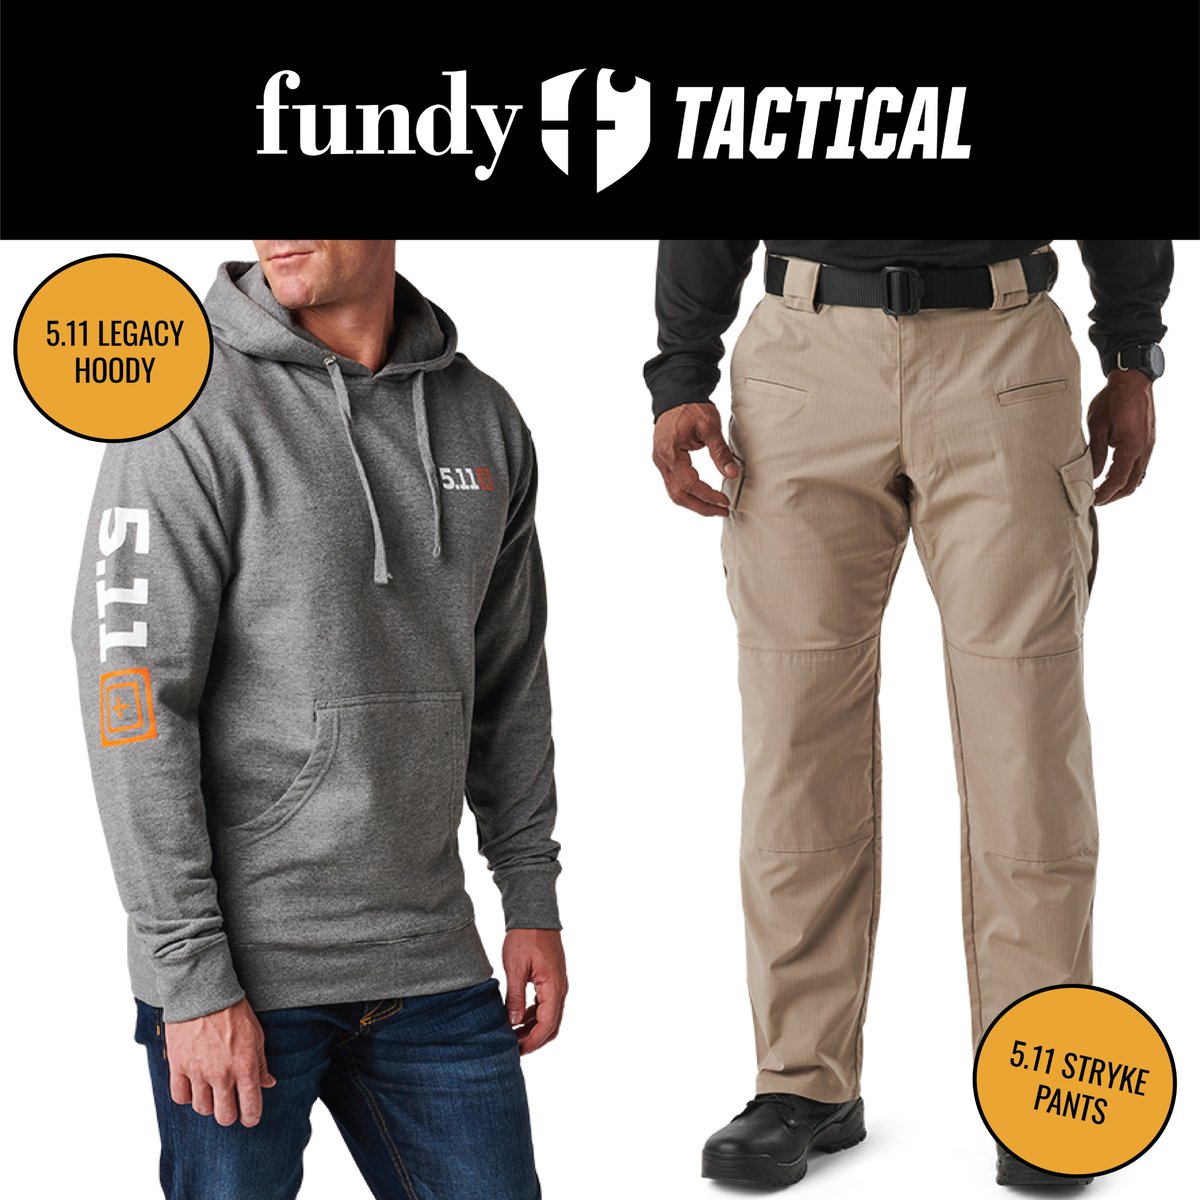 This week, Bill from Moncton Fundy Tactical's pick of the week is the 5.11 Legacy Hoody and the 5.11 Stryke Pants! Some fan favourites!! Visit one of our four Fundy Tactical locations to gear up! #StaffPickoftheWeek #GearUp #BePrepared #ServingThoseWhoServe #511Canada